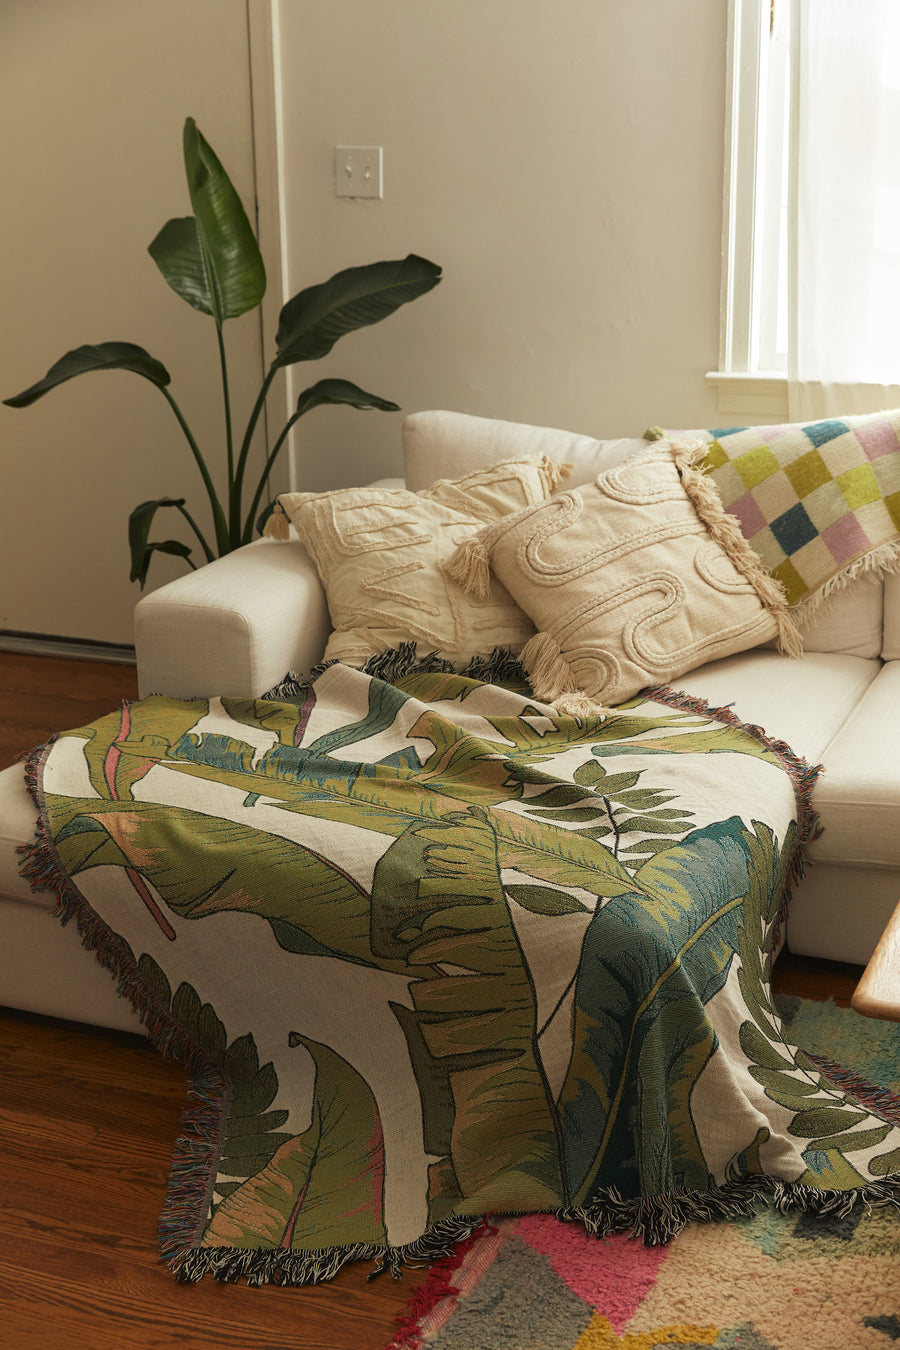 Palm Leaf Throw Blanket On Couch